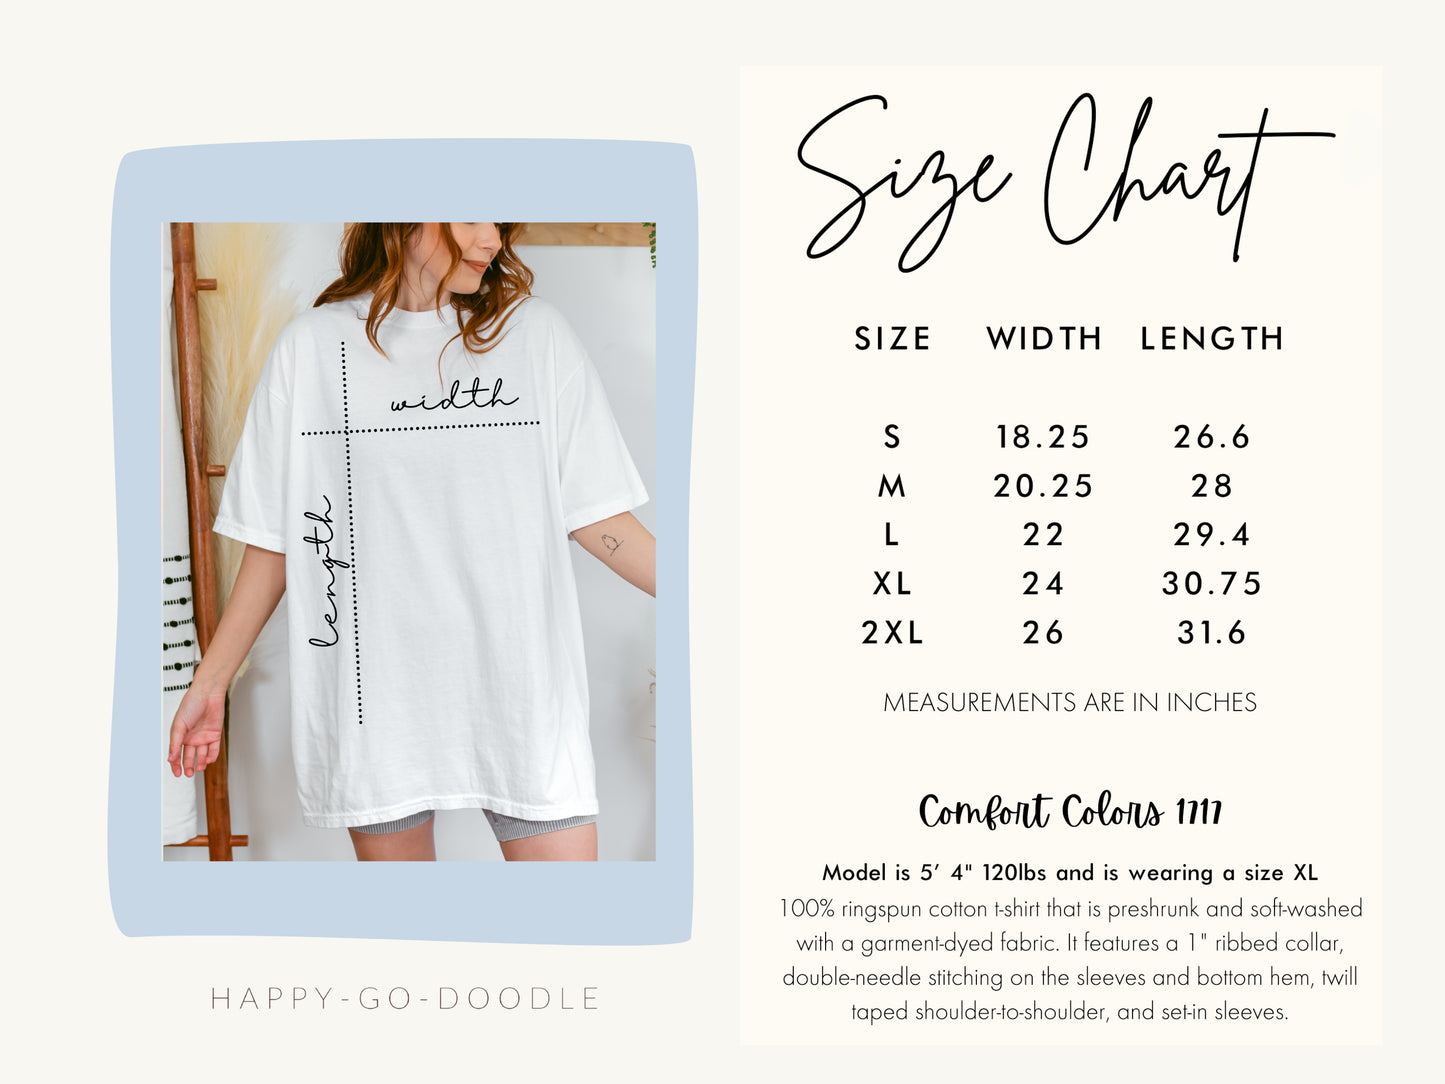 Size chart for comfort colors 1717 t-shirt